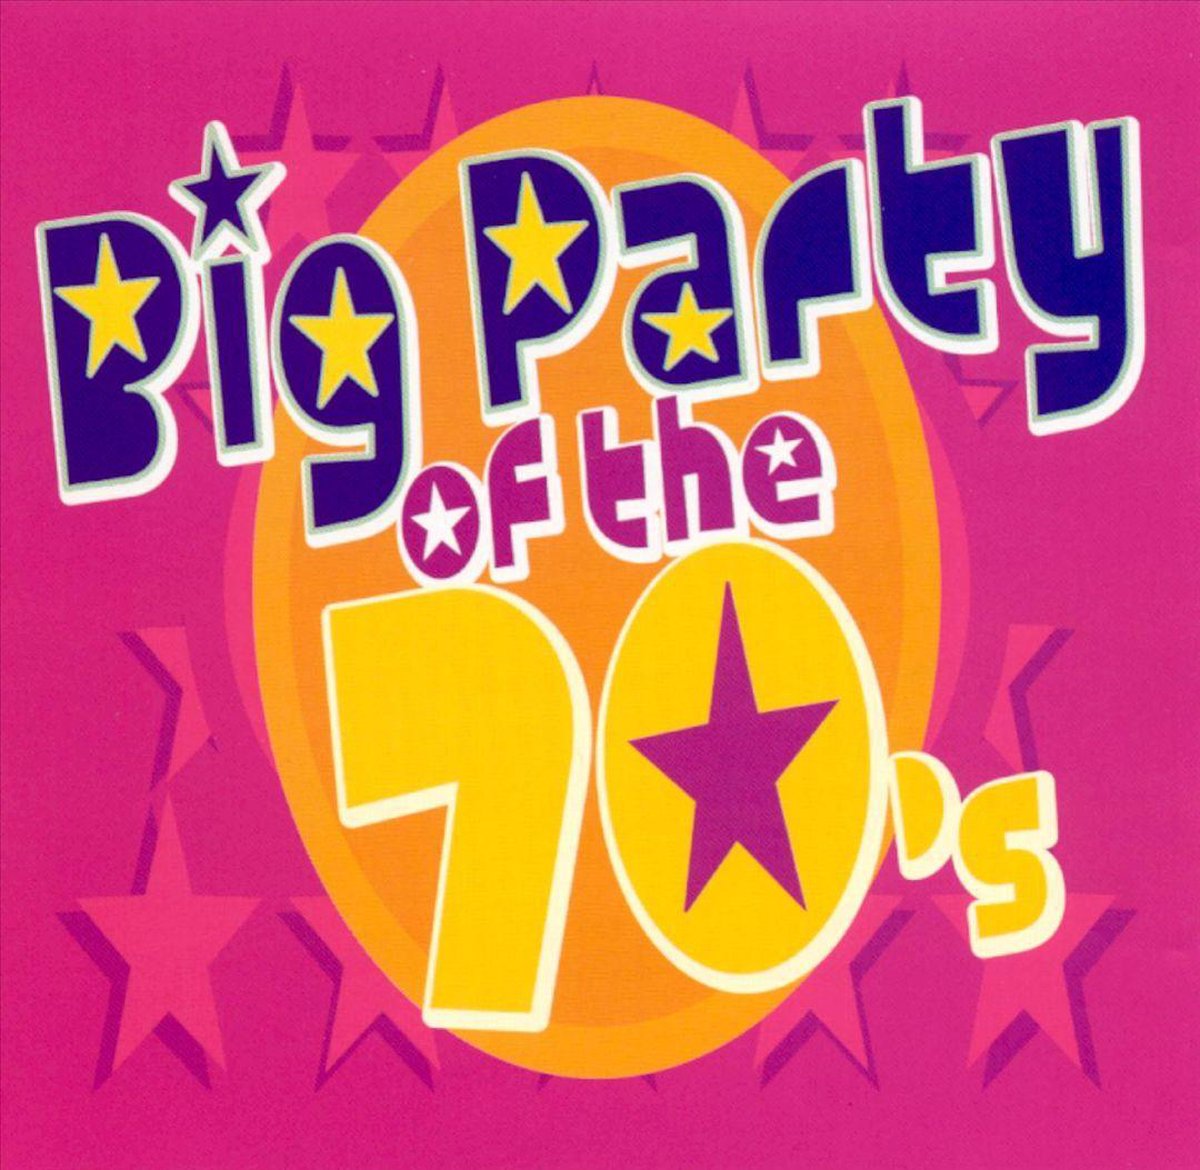 Big Party of the 70's - various artists